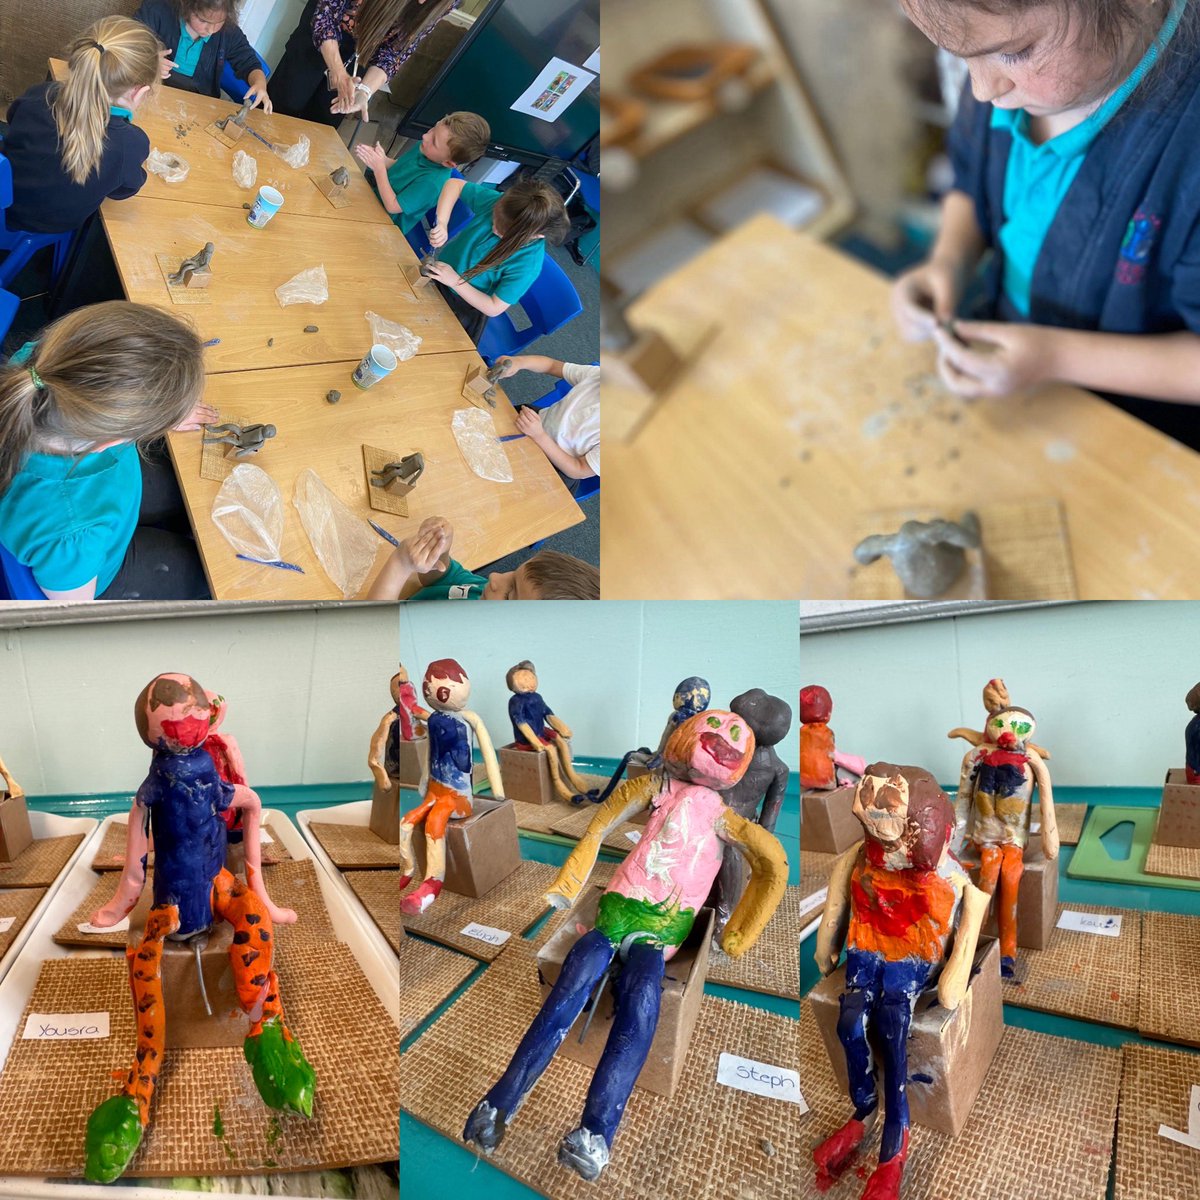 Our Year 1 children have thoroughly enjoyed their Art lessons this half term on ‘Sculpture’. They have used the work of Degas, Gormley, Hepworth, Moore and Glacometti to guide and develop their skills. 🎨 #Beingbrilliant ⭐️